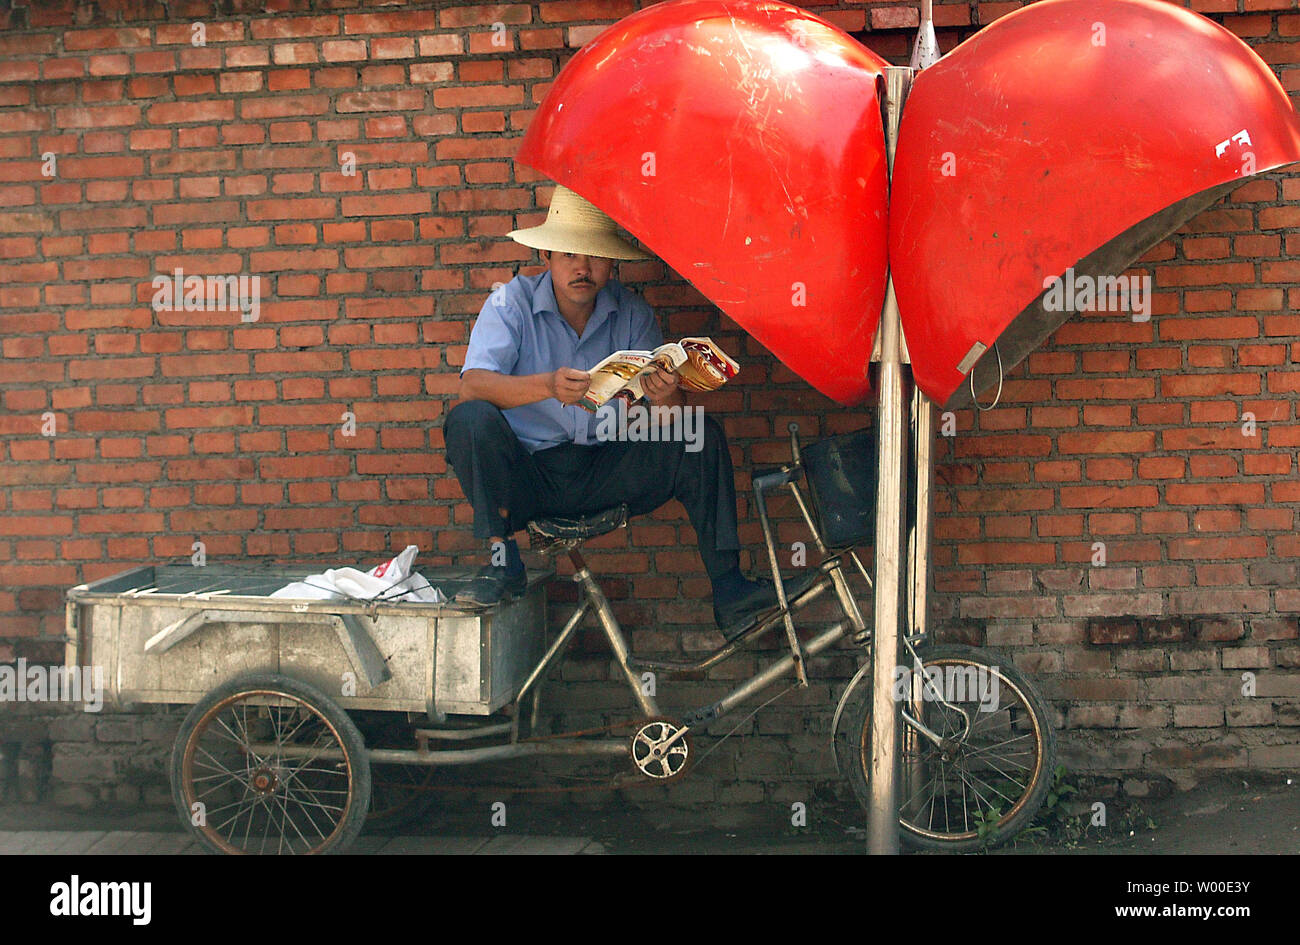 A Chinese delivery man shelters from the midday sun under a phone booth  as he reads a magazine in central Beijing, August 2, 2006.  Officials are examining new steps to cool off China's sizzling economy as its top planning agency called for tighter bank credit and curbs on construction, state media reported.  The reports Wednesday suggested Beijing believes earlier measures, including an interest rate rise in April, are failing to contain runaway growth in spending on factories and other assets that Chinese leaders worry could ignite a financial crisis.  (UPI Photo/Stephen Shaver) Stock Photo